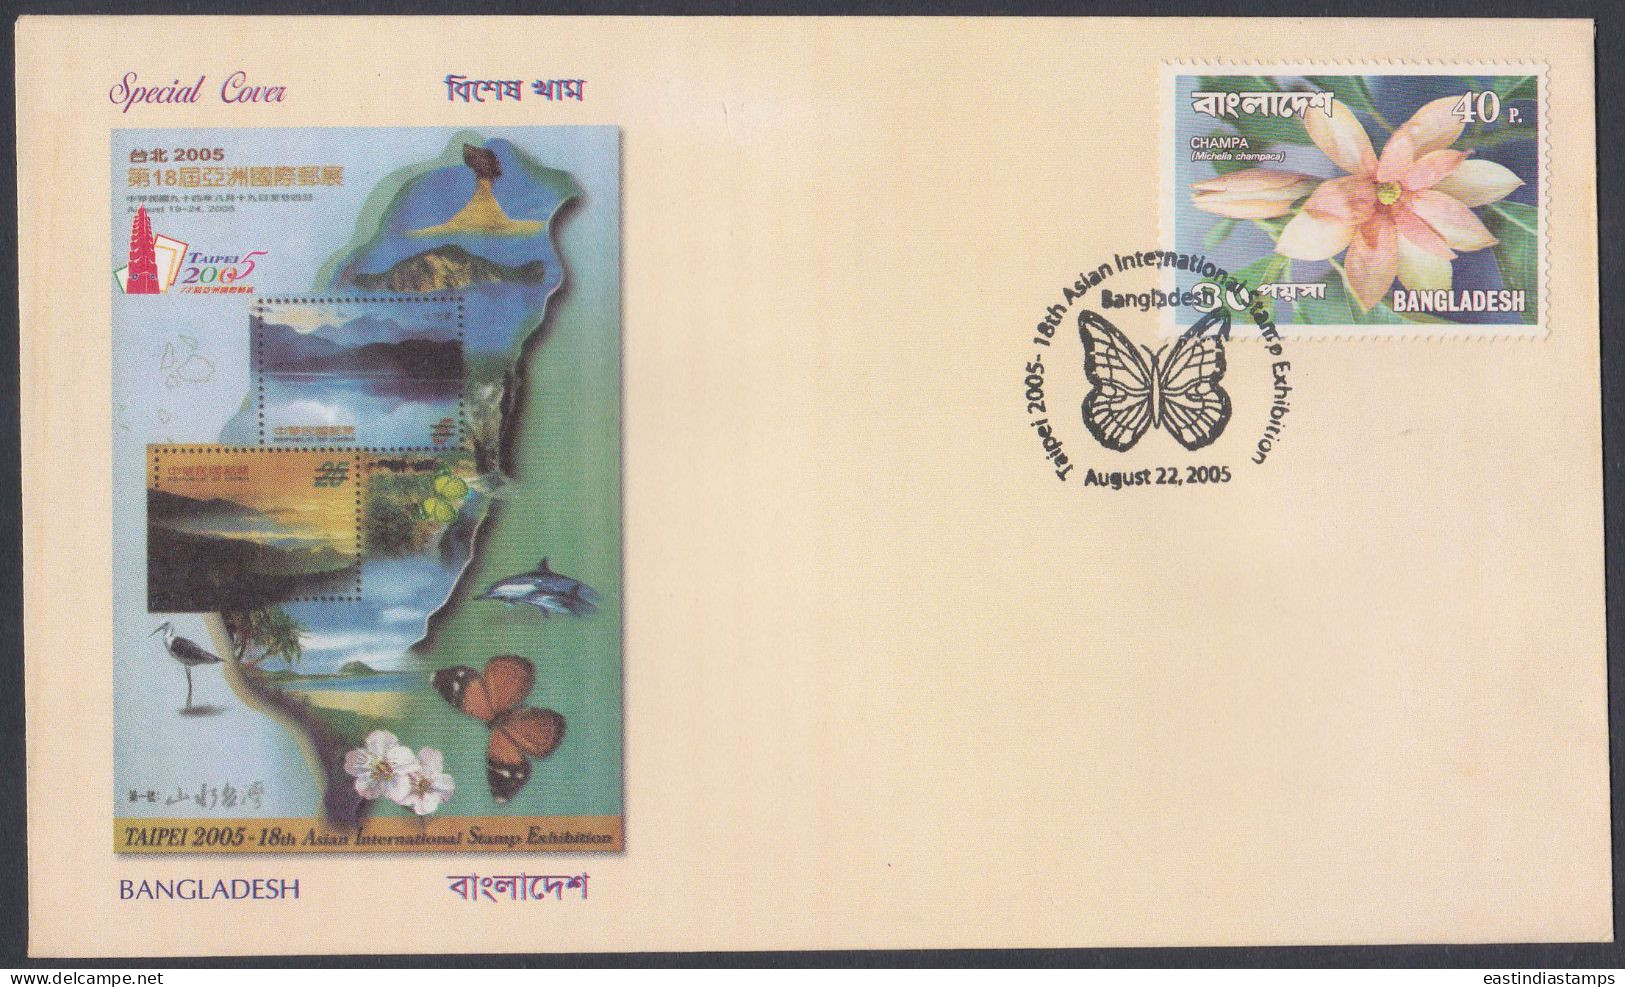 Bangladesh 2005 Special Cover Taipei, Stamp Exhibition, Flower, Butterfly, Dolphin, Stork, Mountain - Bangladesh